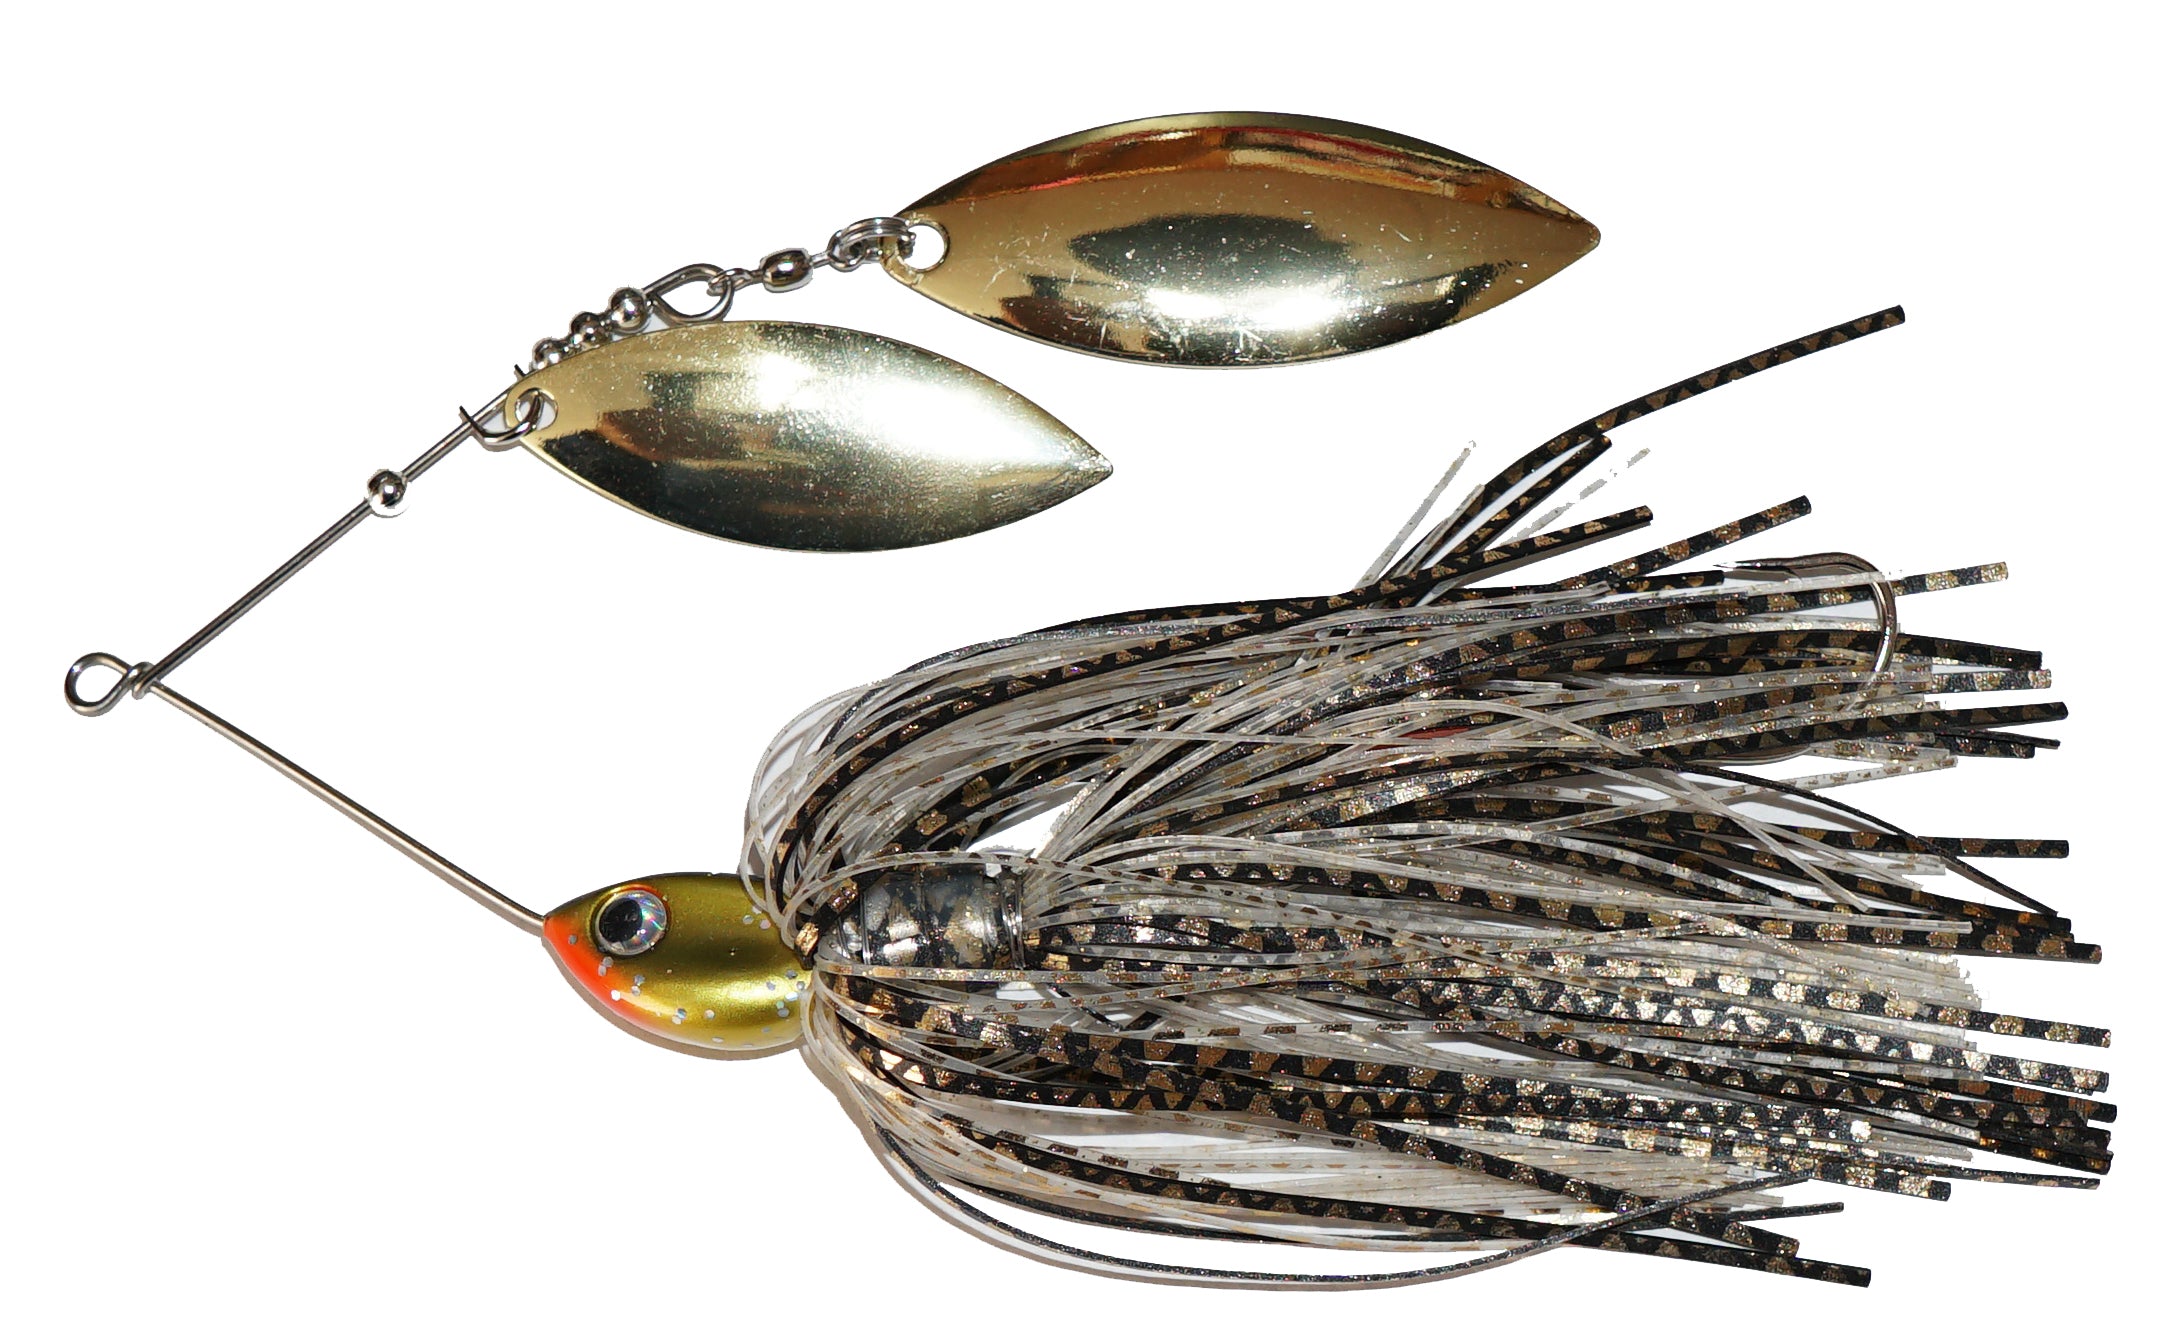 Northland Reed Runner Single Spinnerbait in White, Size 1/4 Oz from The Fishin' Hole